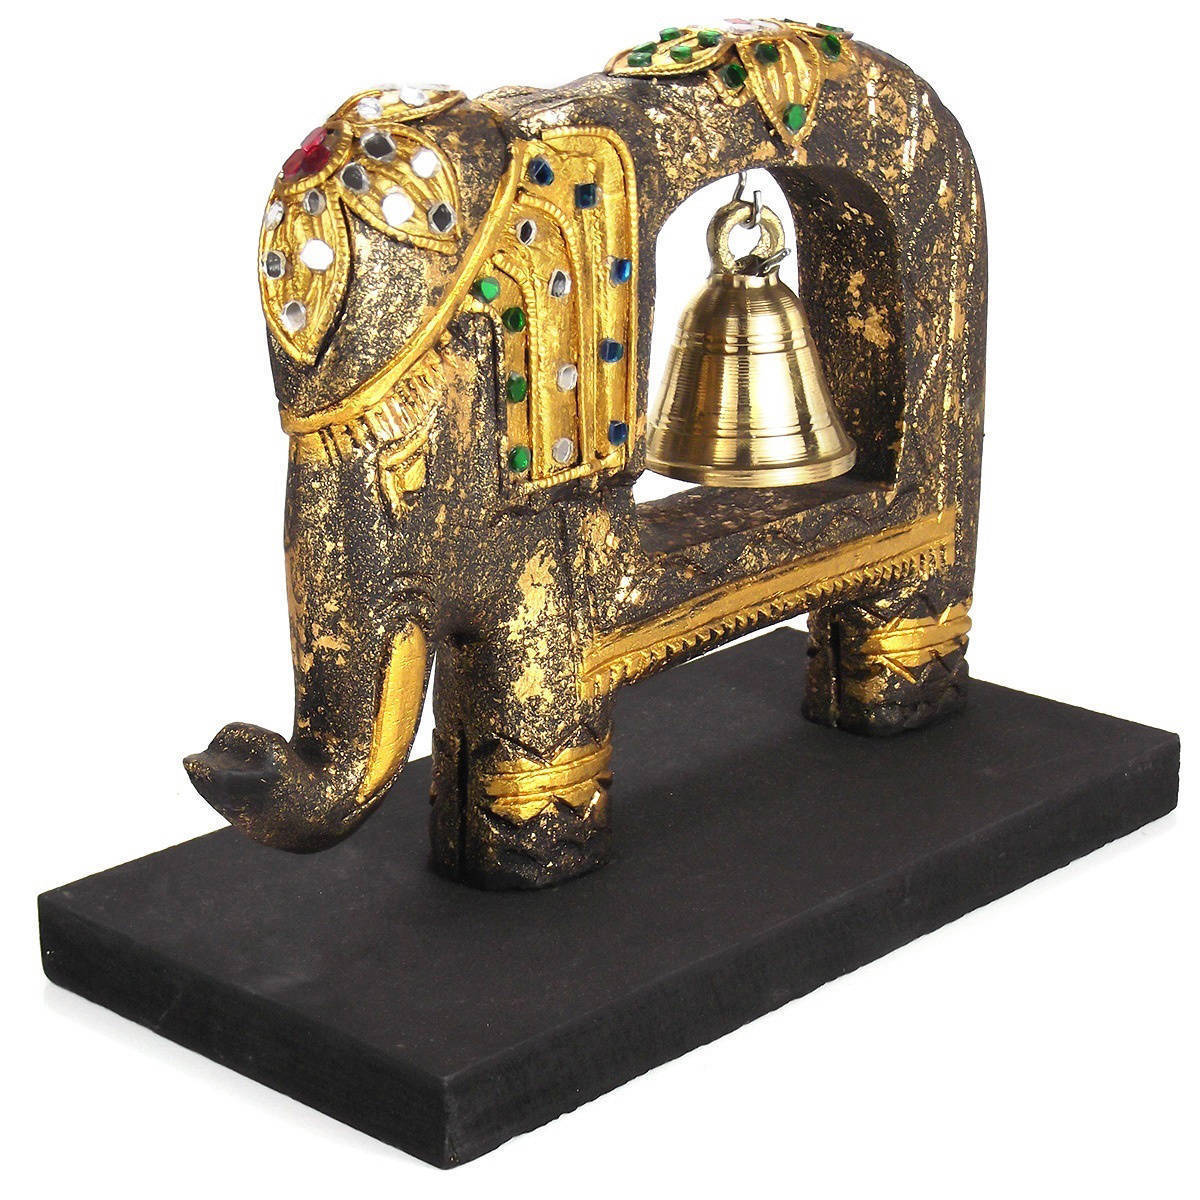 Standing Wooden Elephant with Brass Bell Natural Finish Handcarved in Thailand 